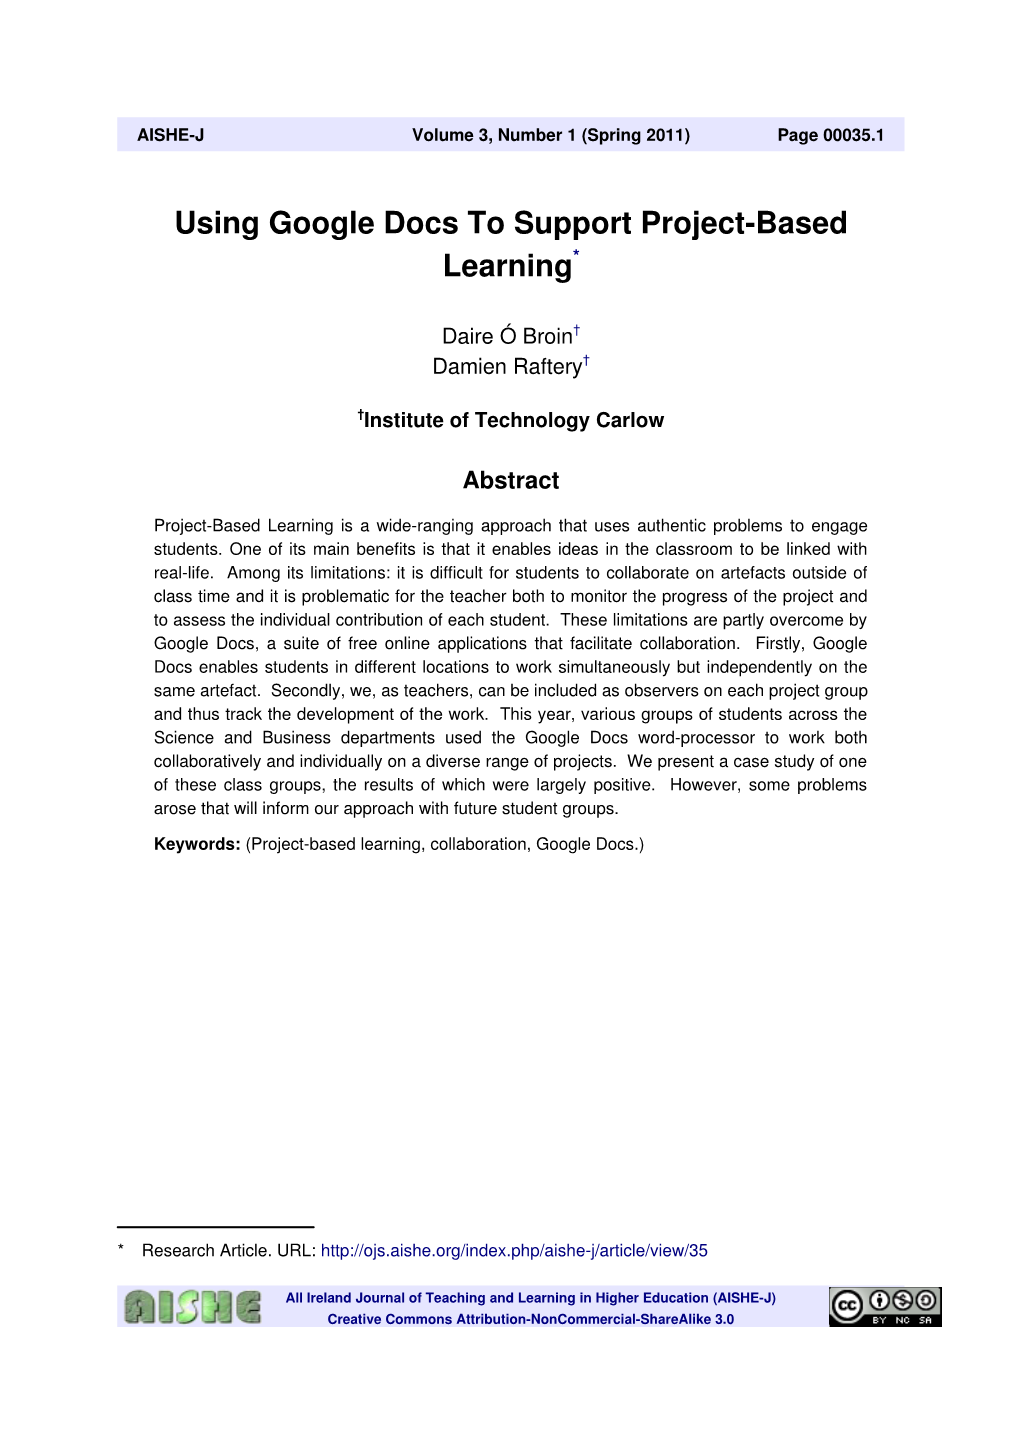 Using Google Docs to Support Project-Based Learning*